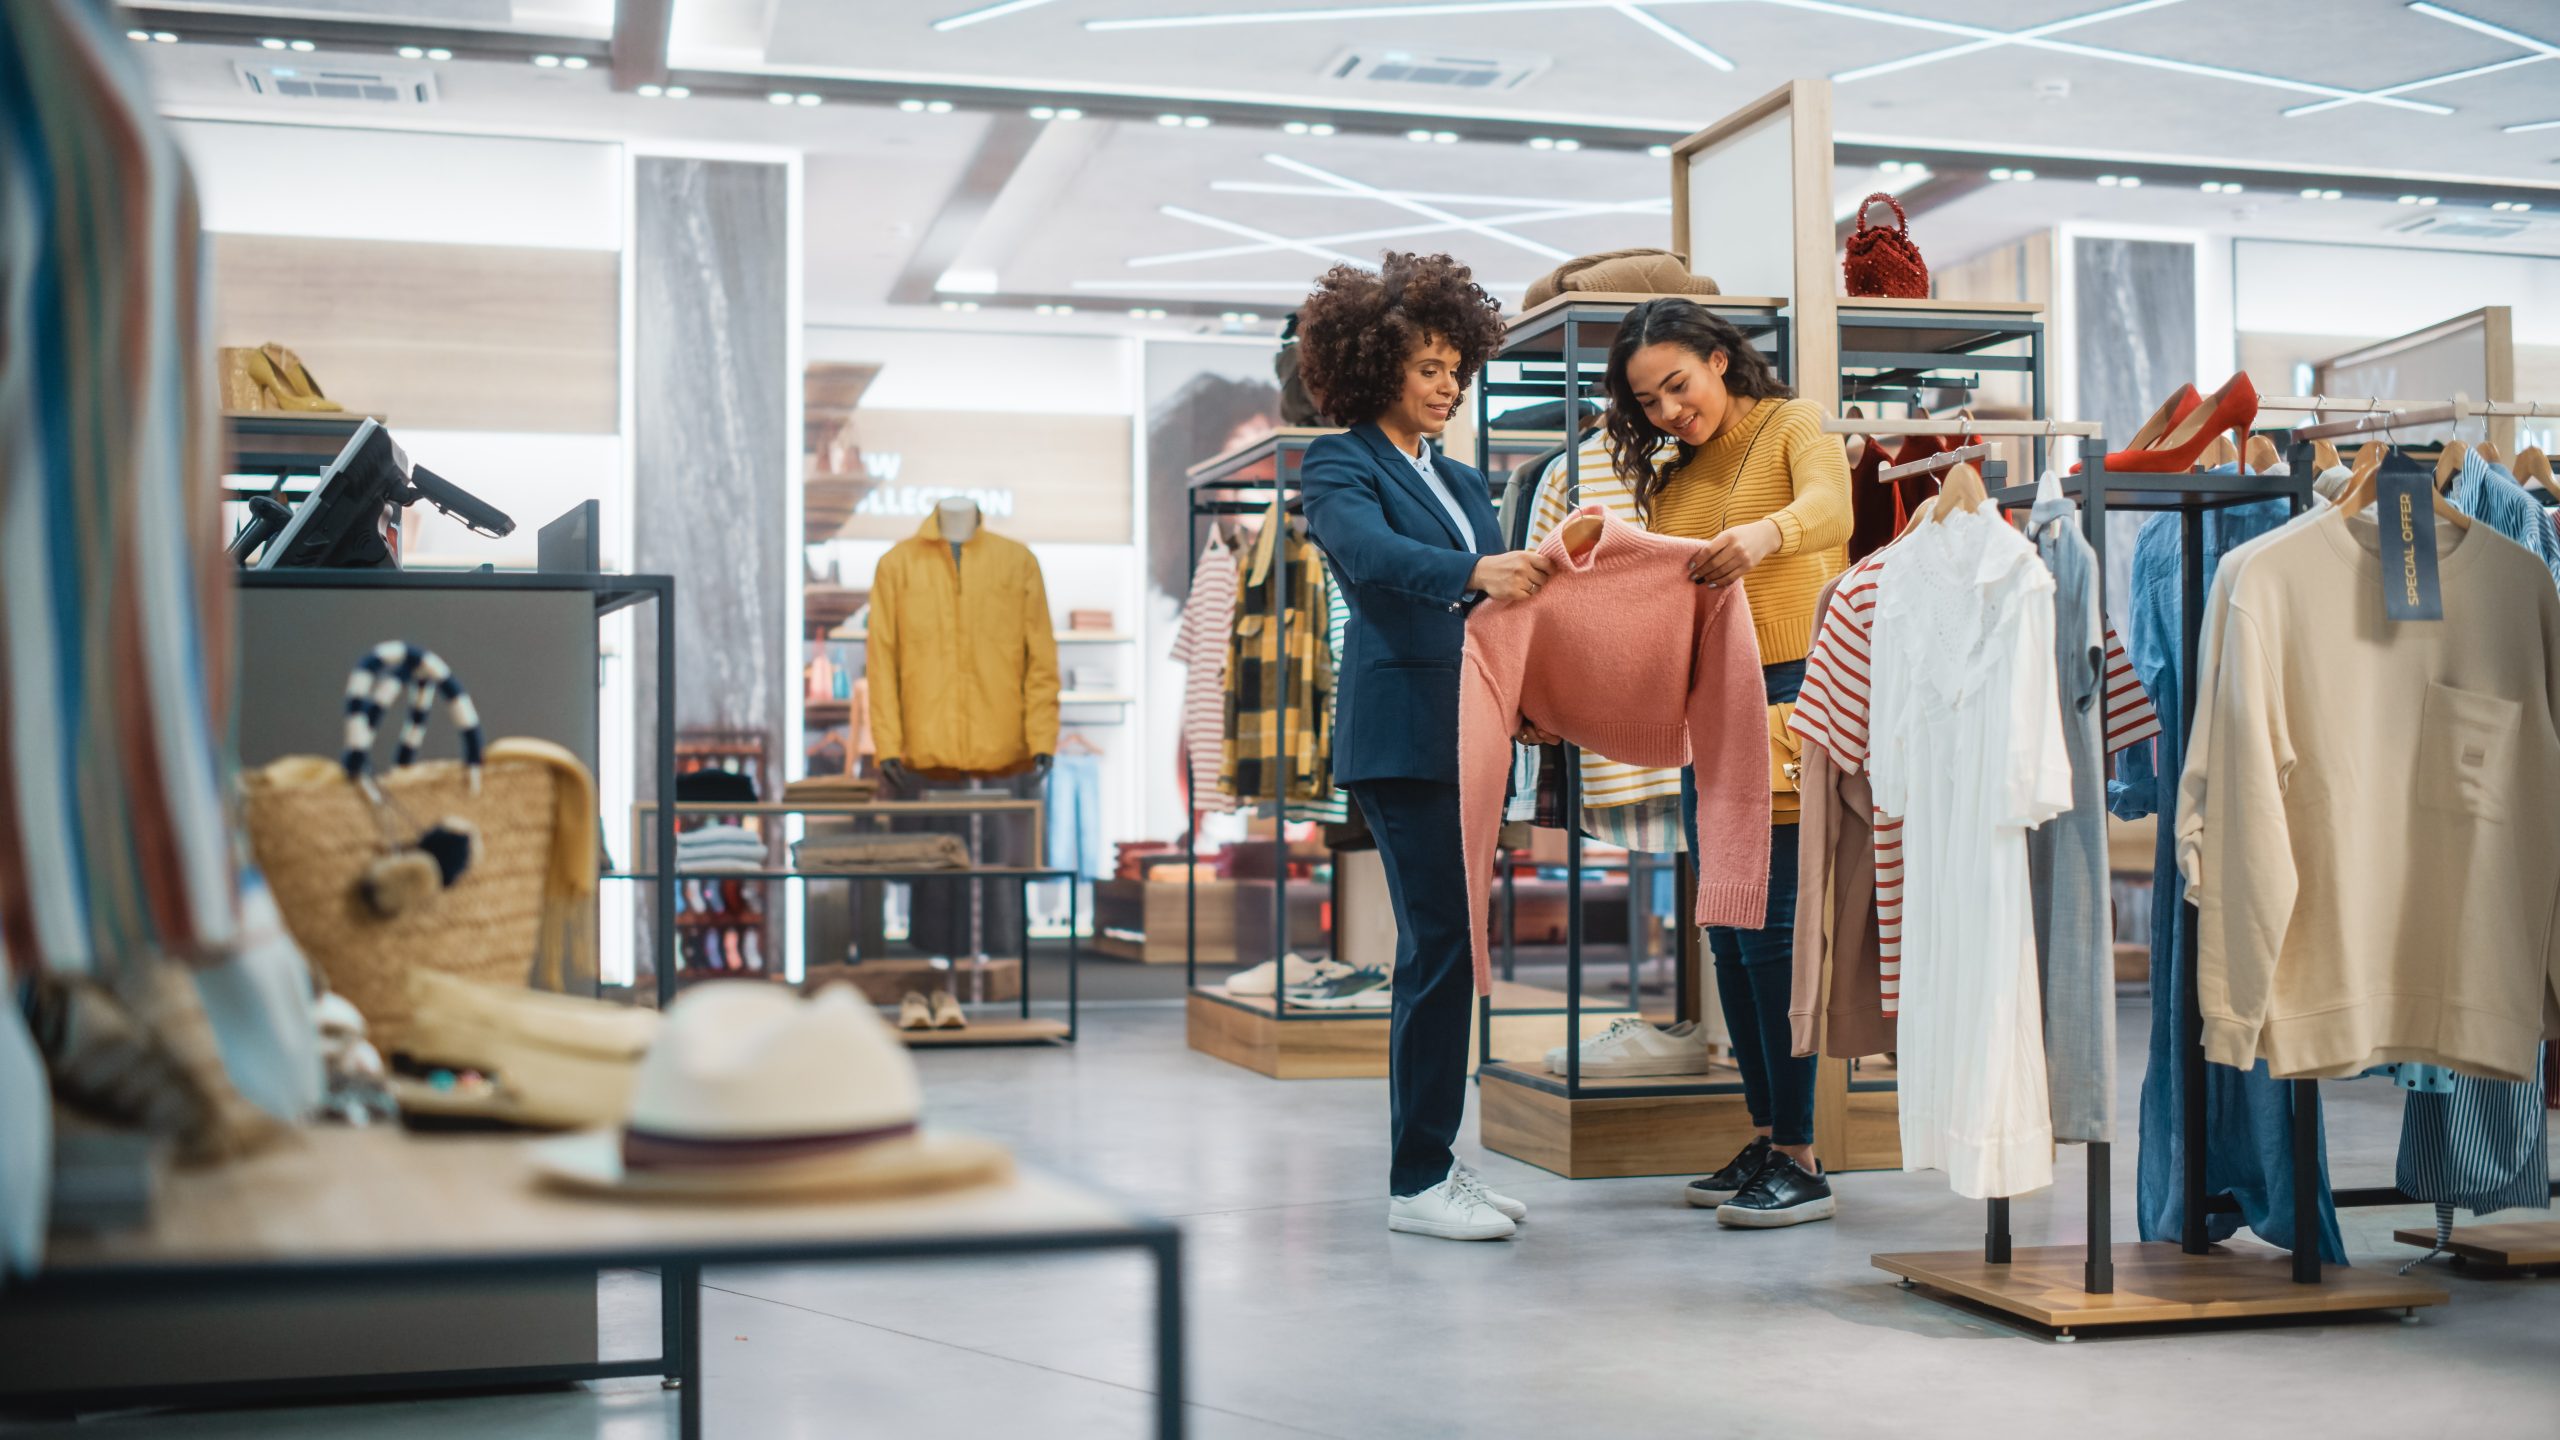 Despite rising interest rates and concerns about a faltering economy, consumers showed surprising strength by driving retail sales in September to levels well beyond expectations.